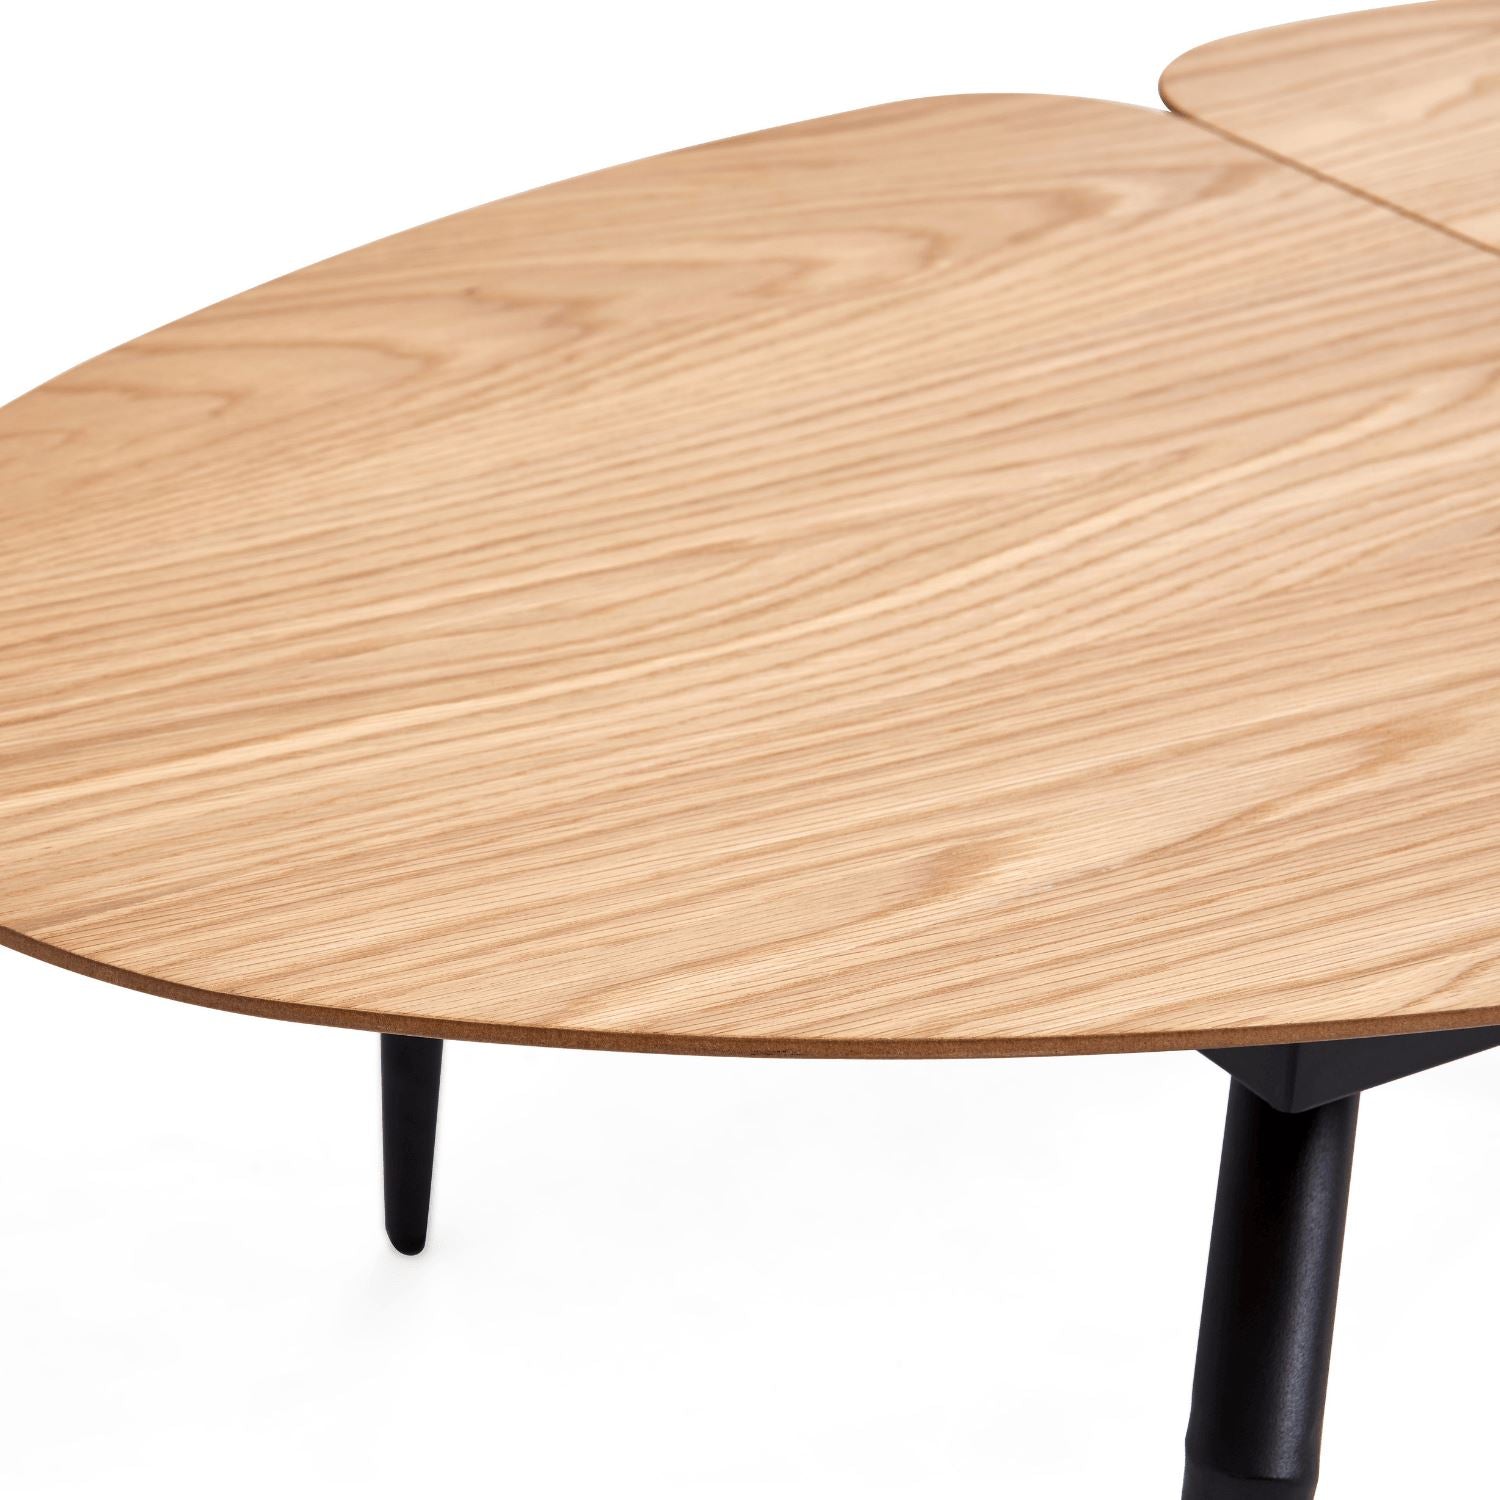 Valboard Coffee Table - Valyou 